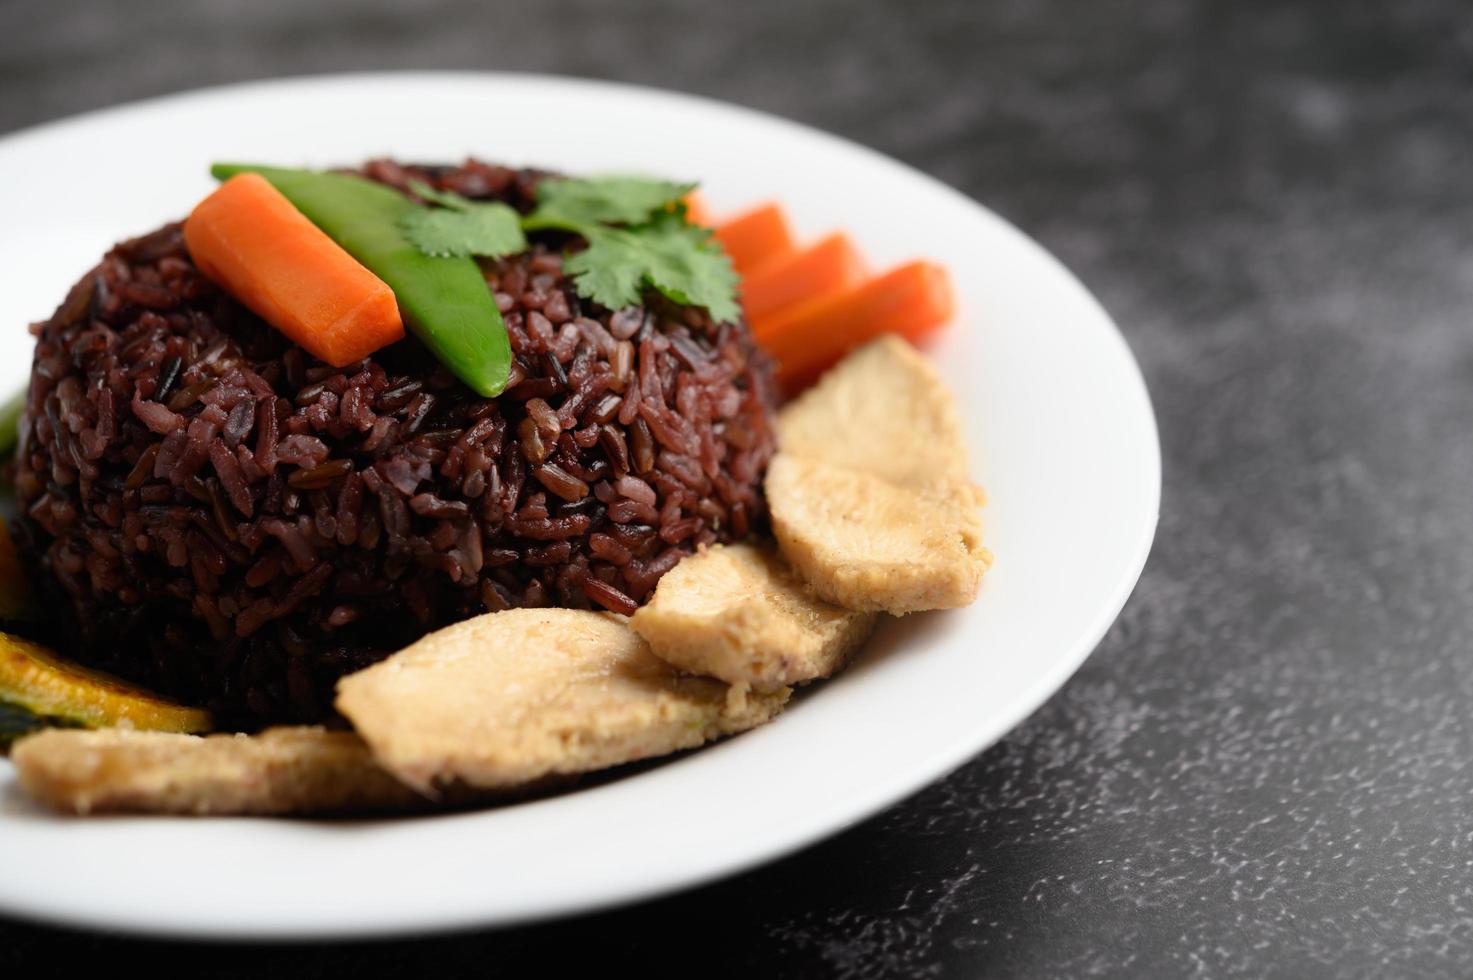 Purple rice berries with grilled chicken breast, pumpkin, carrots and mint photo